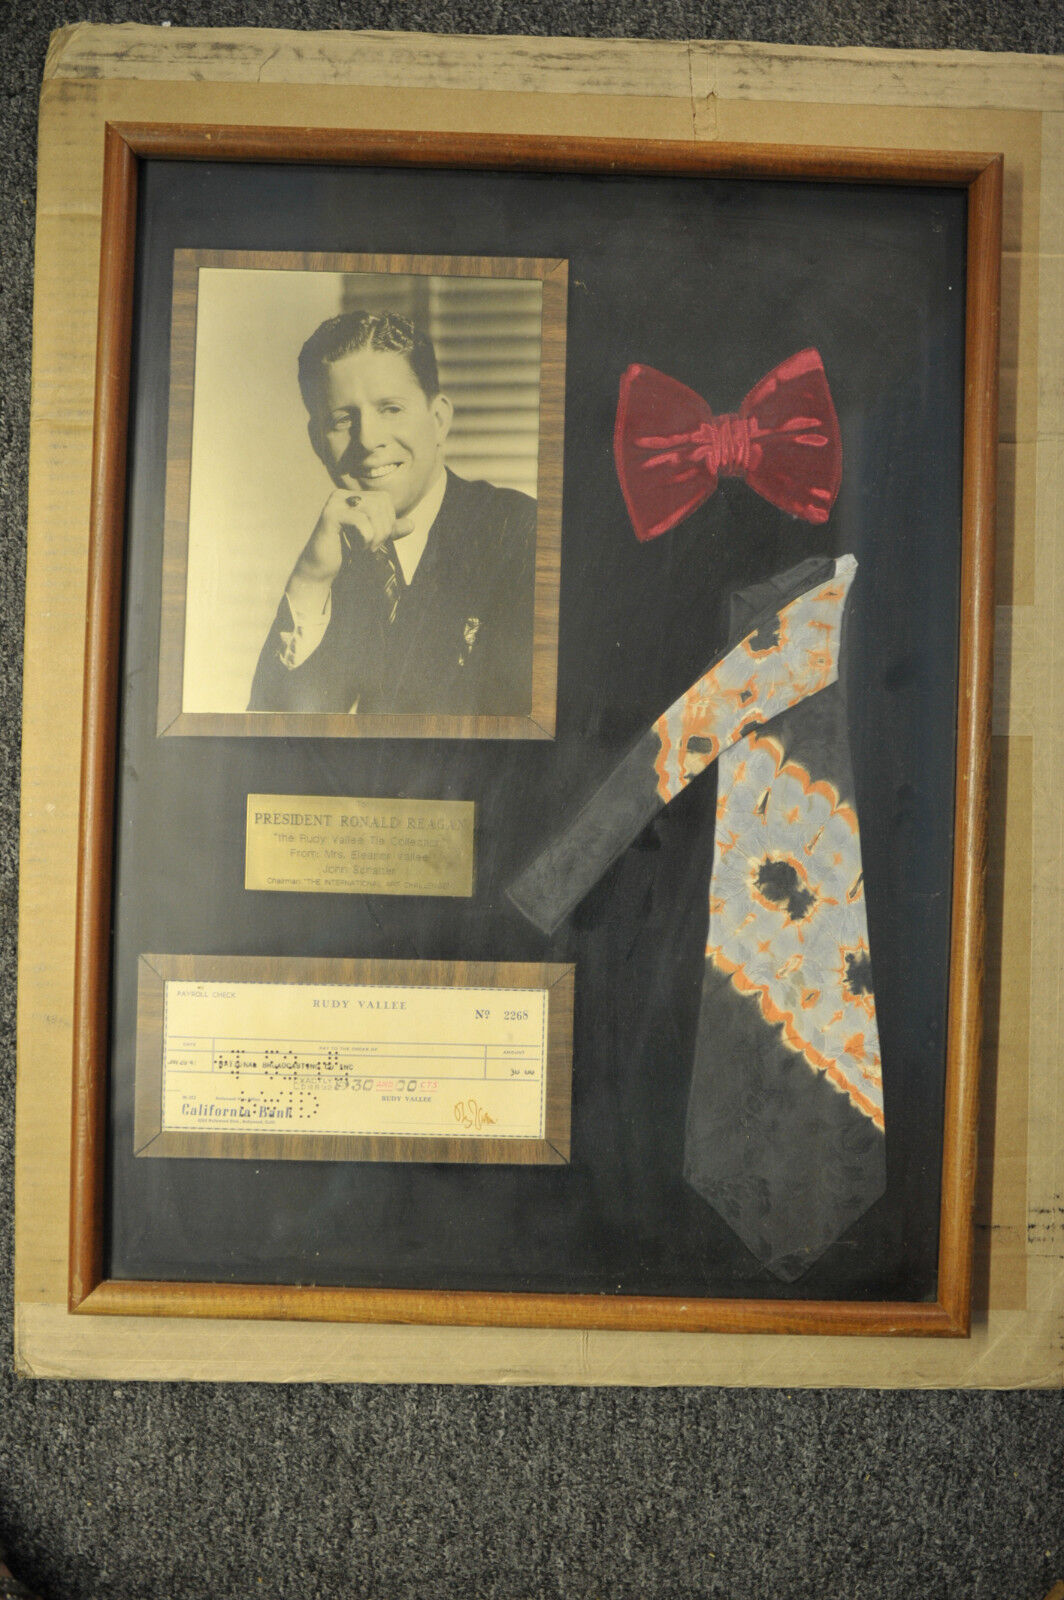 PRESIDENT RONALD REAGAN / RUDY VALLEE - CHARITY PLAQUE GIVEN TO PRESIDENT REAGAN